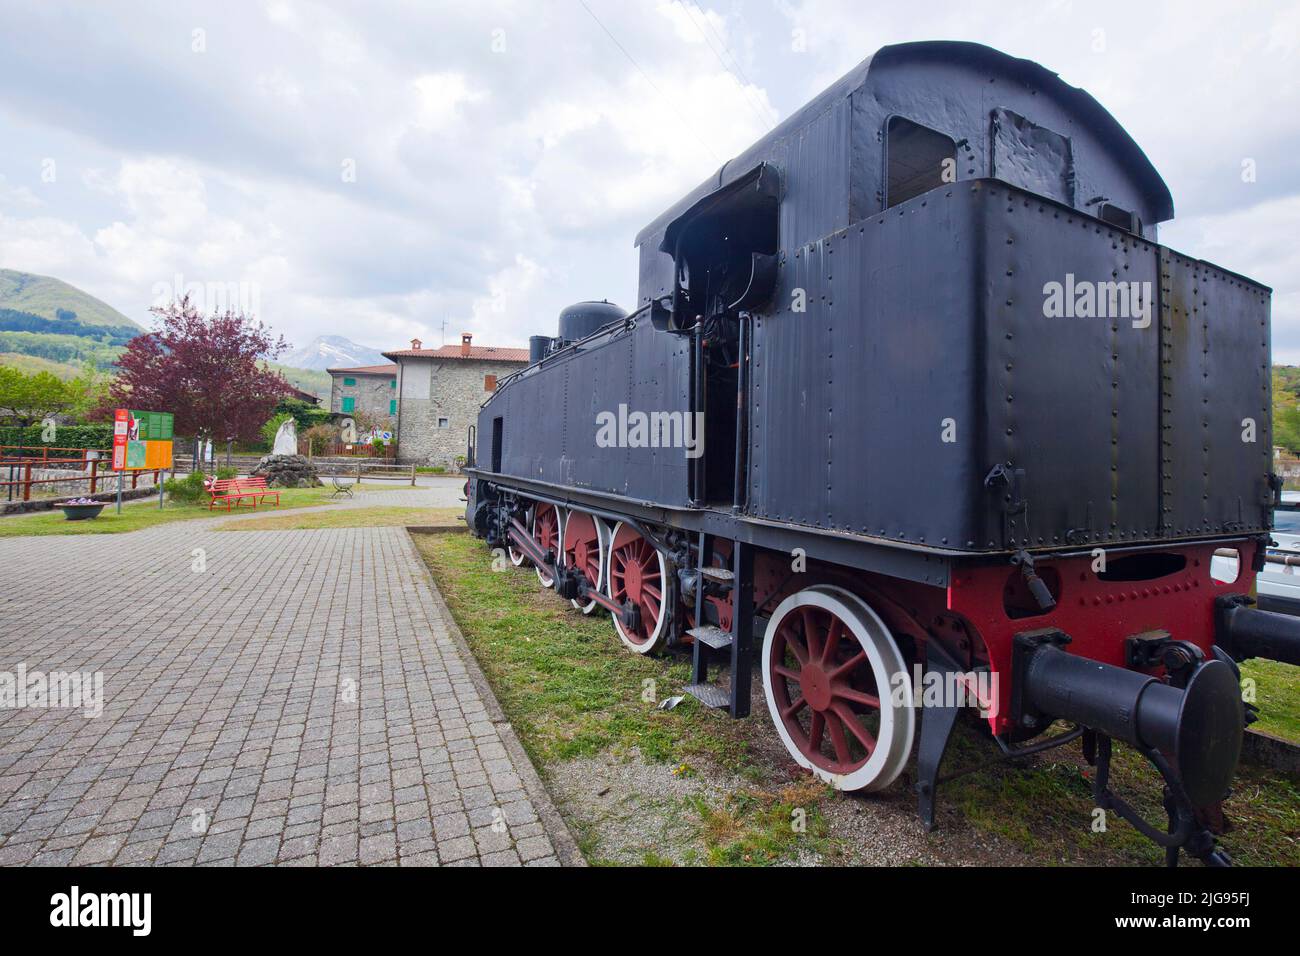 Piazza al Serchio is an Italian municipality in the province of Lucca in Tuscany, the monument locomotive 940.002 year of construction 1922 Stock Photo